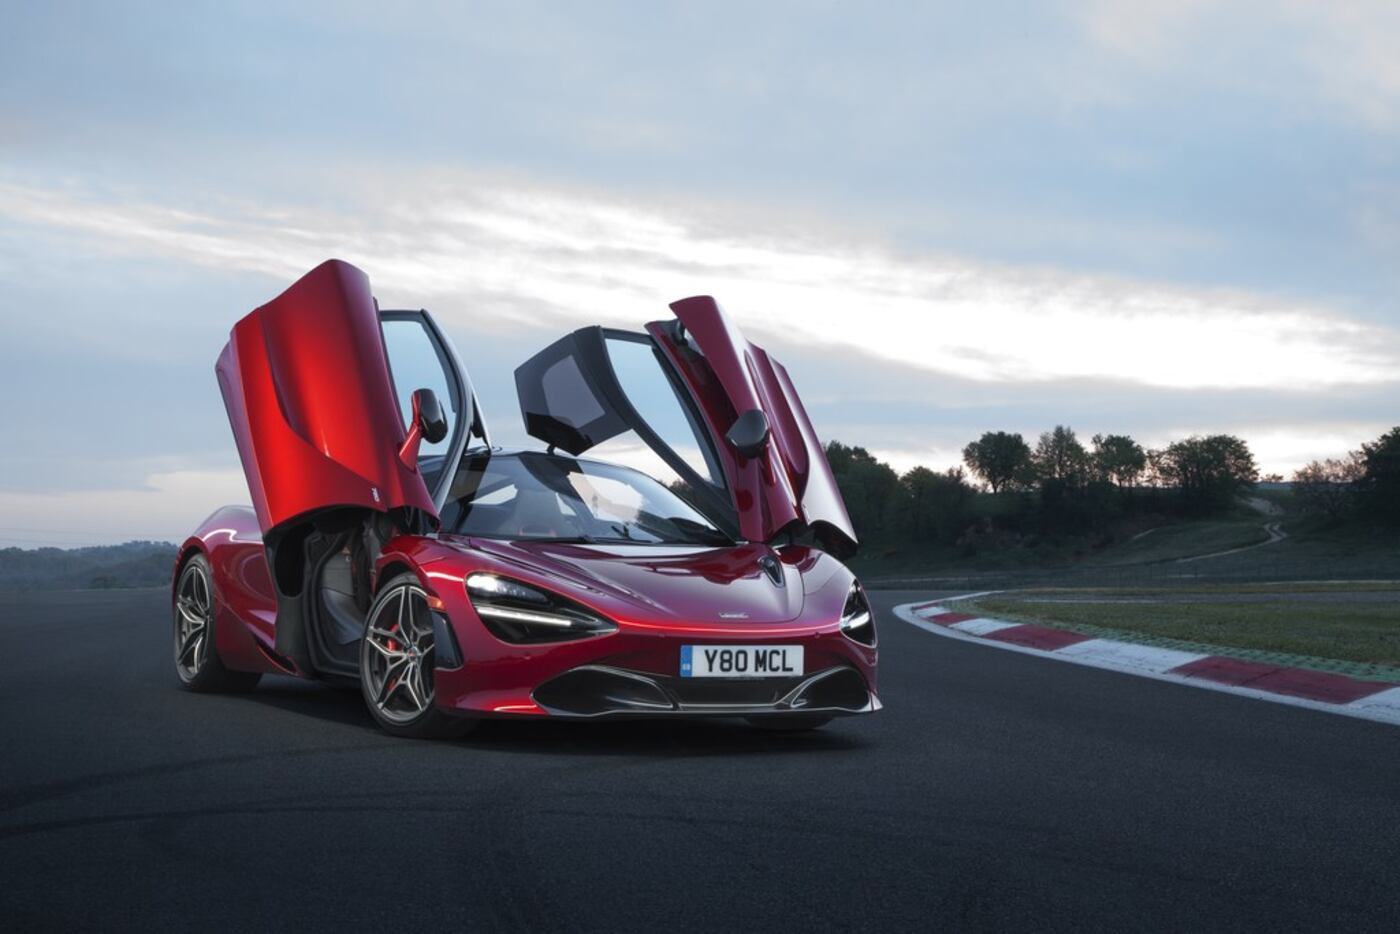 The new McLaren 720S gets to 60 mph in 2.8 seconds.